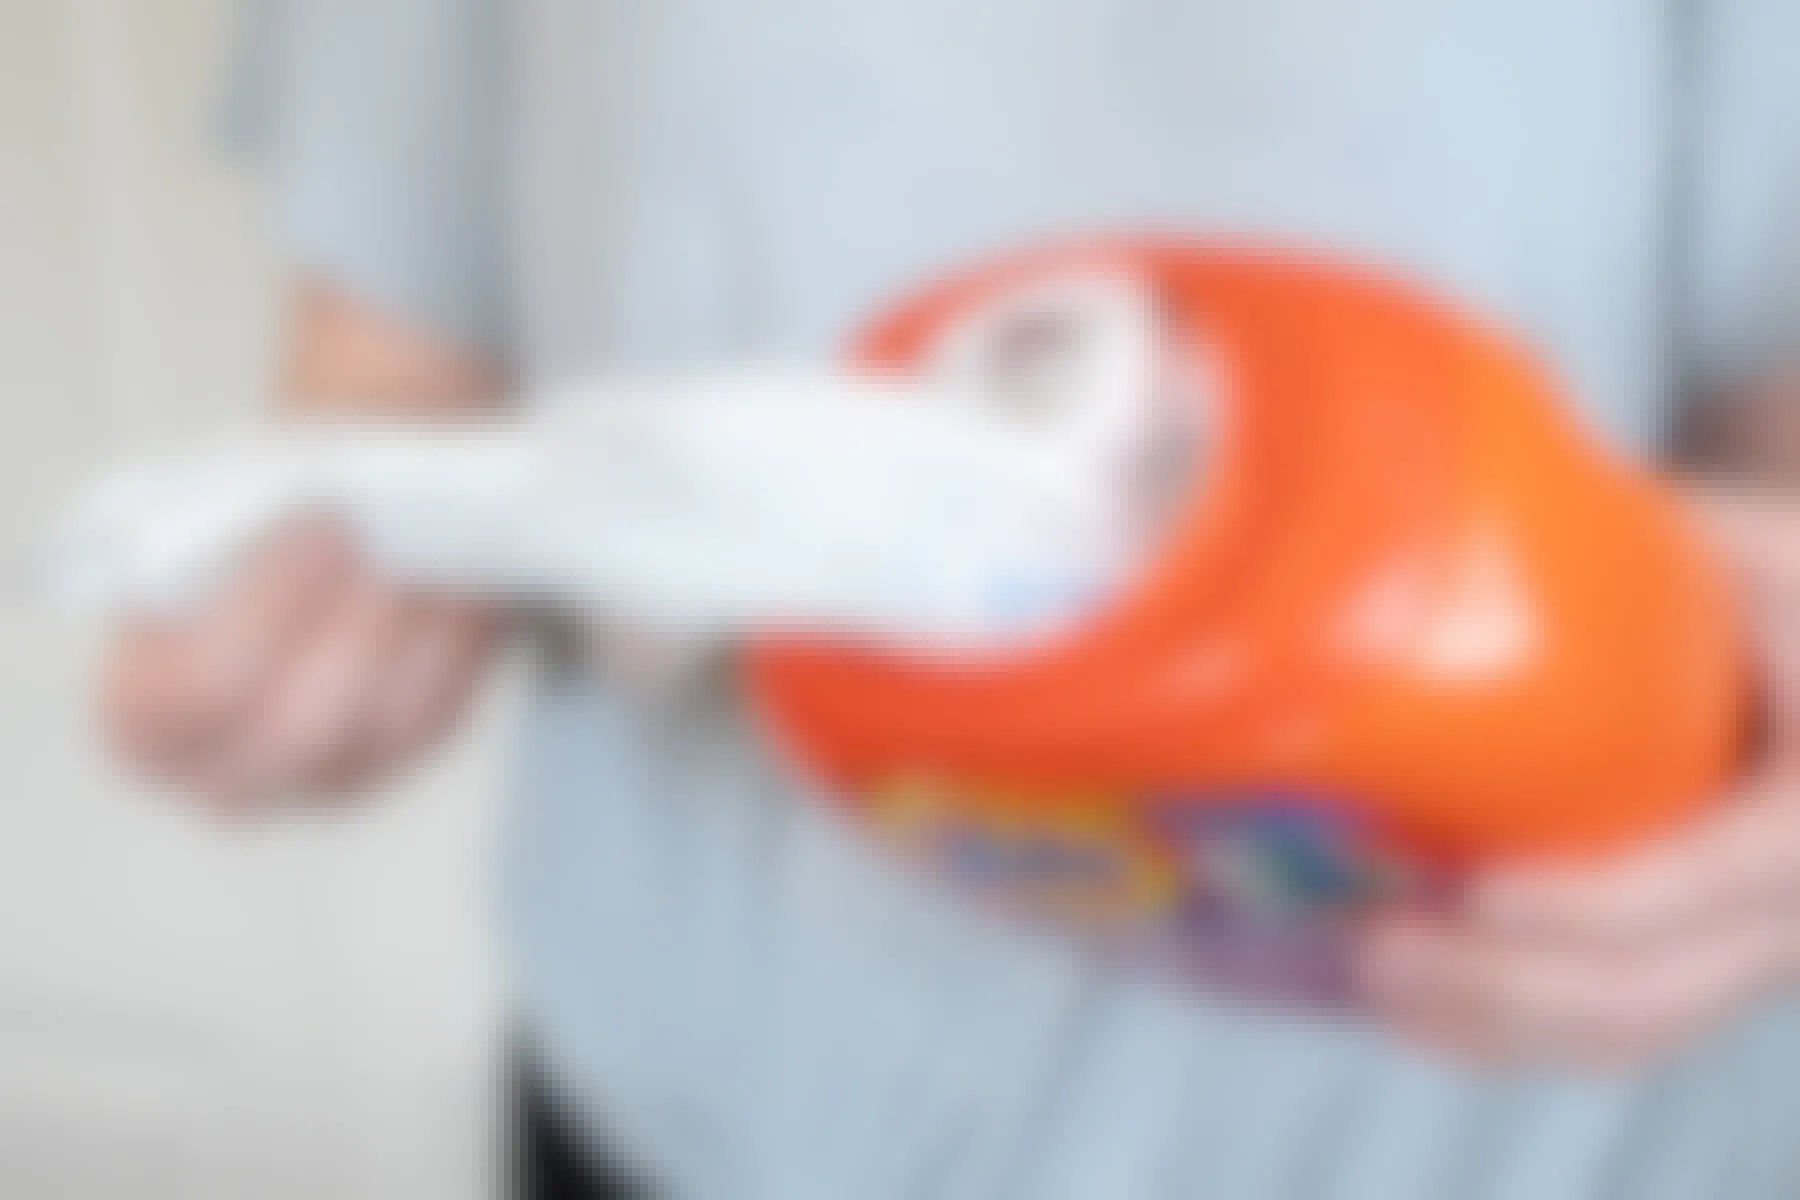 someone pulling plastic grocery bags out of a laundry detergent bottle